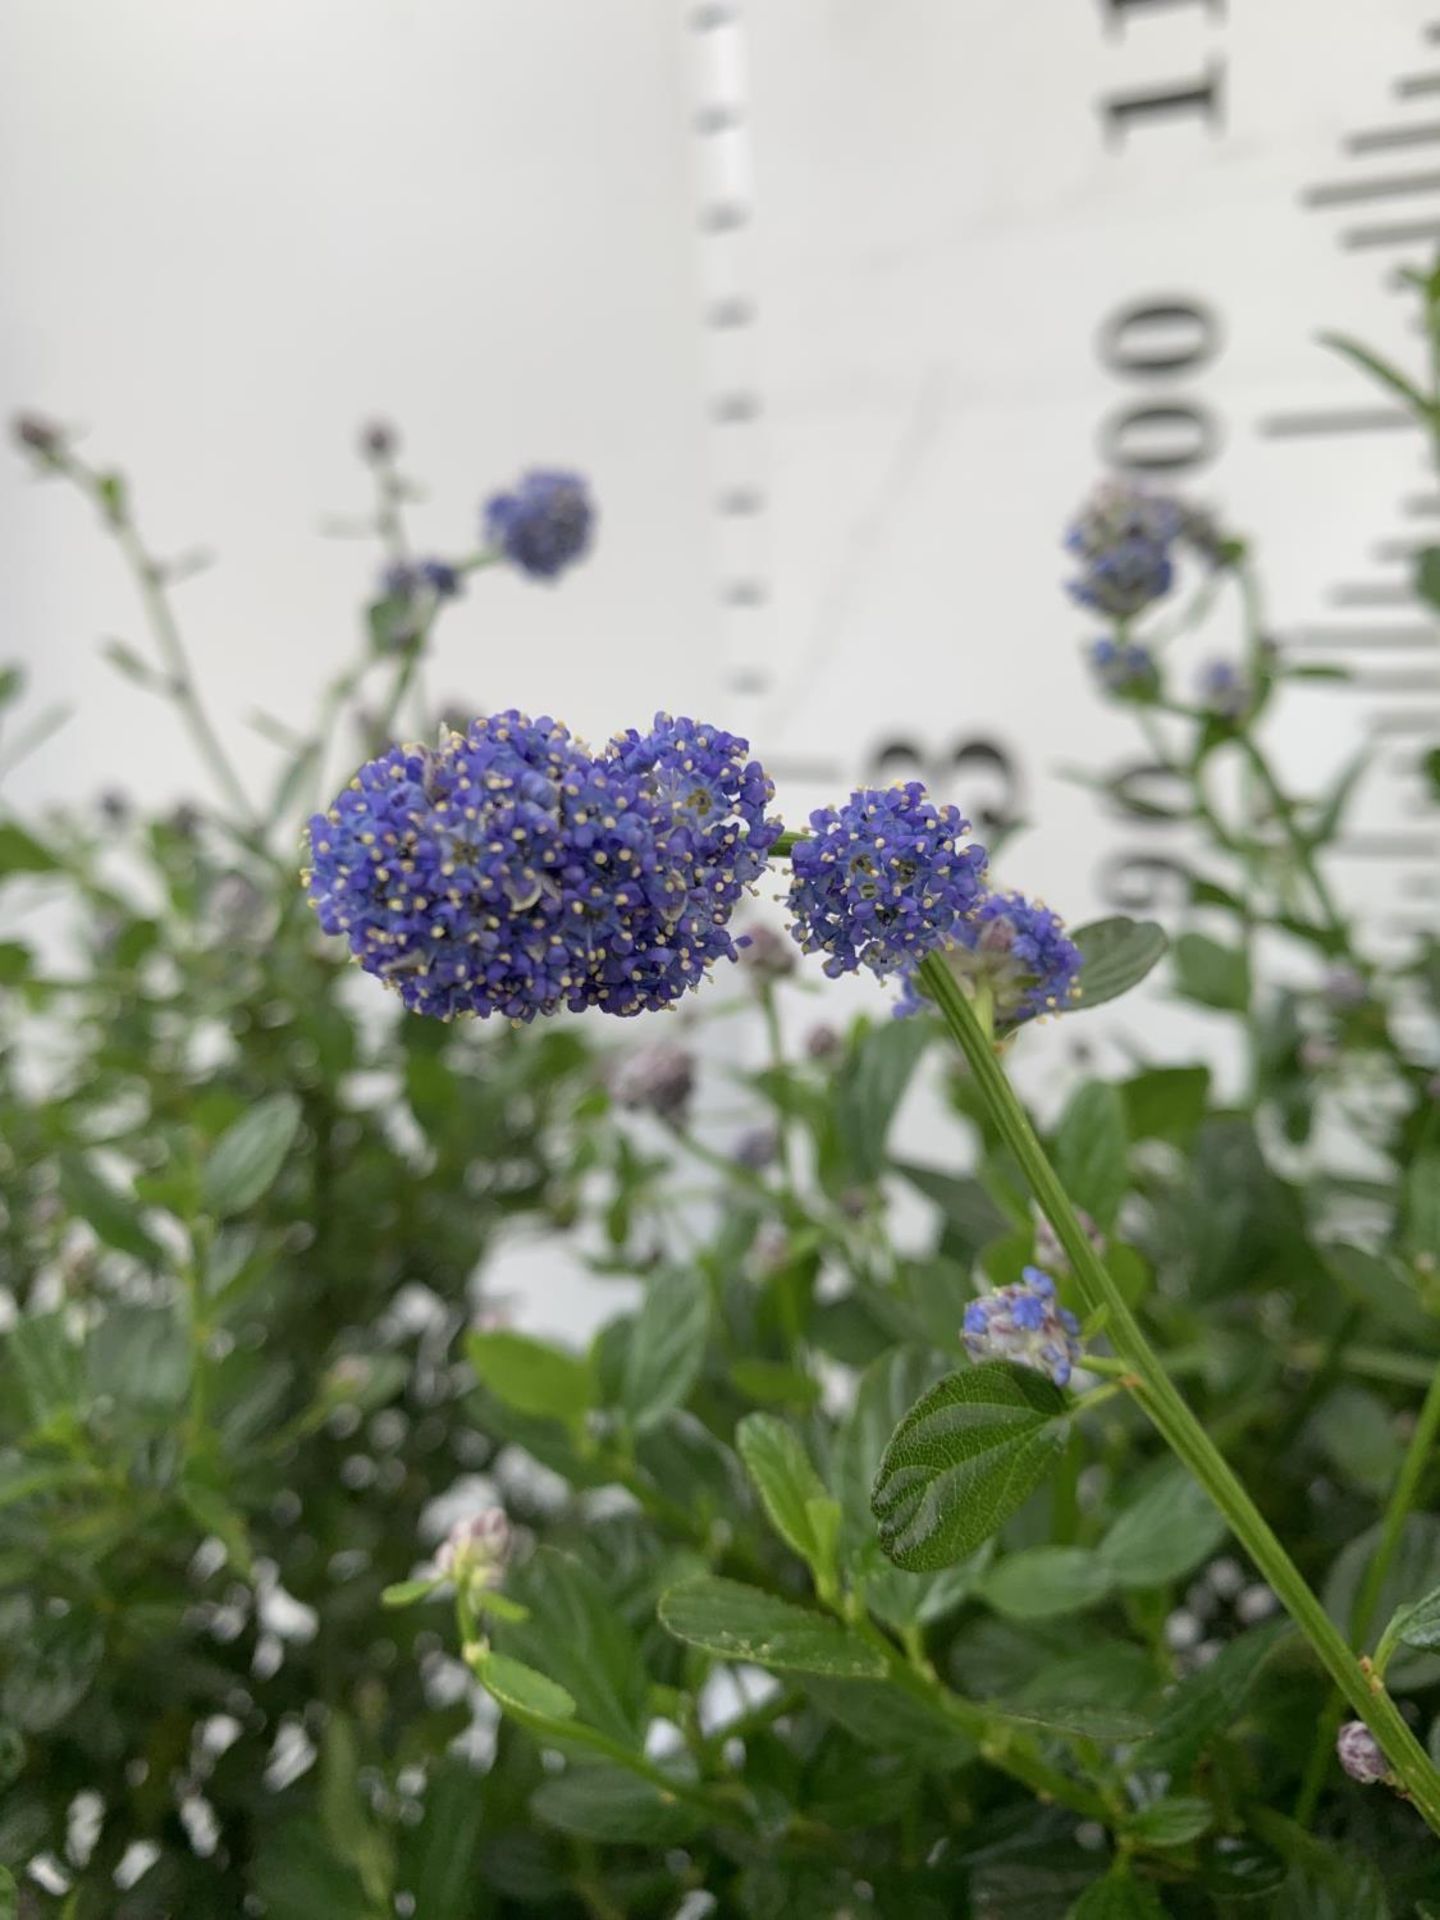 TWO CEANOTHUS IMPRESSUS STANDARD TREES 'VICTORIA' IN FLOWER APPROX 110CM IN HEIGHT IN 3LTR POTS PLUS - Image 8 of 10